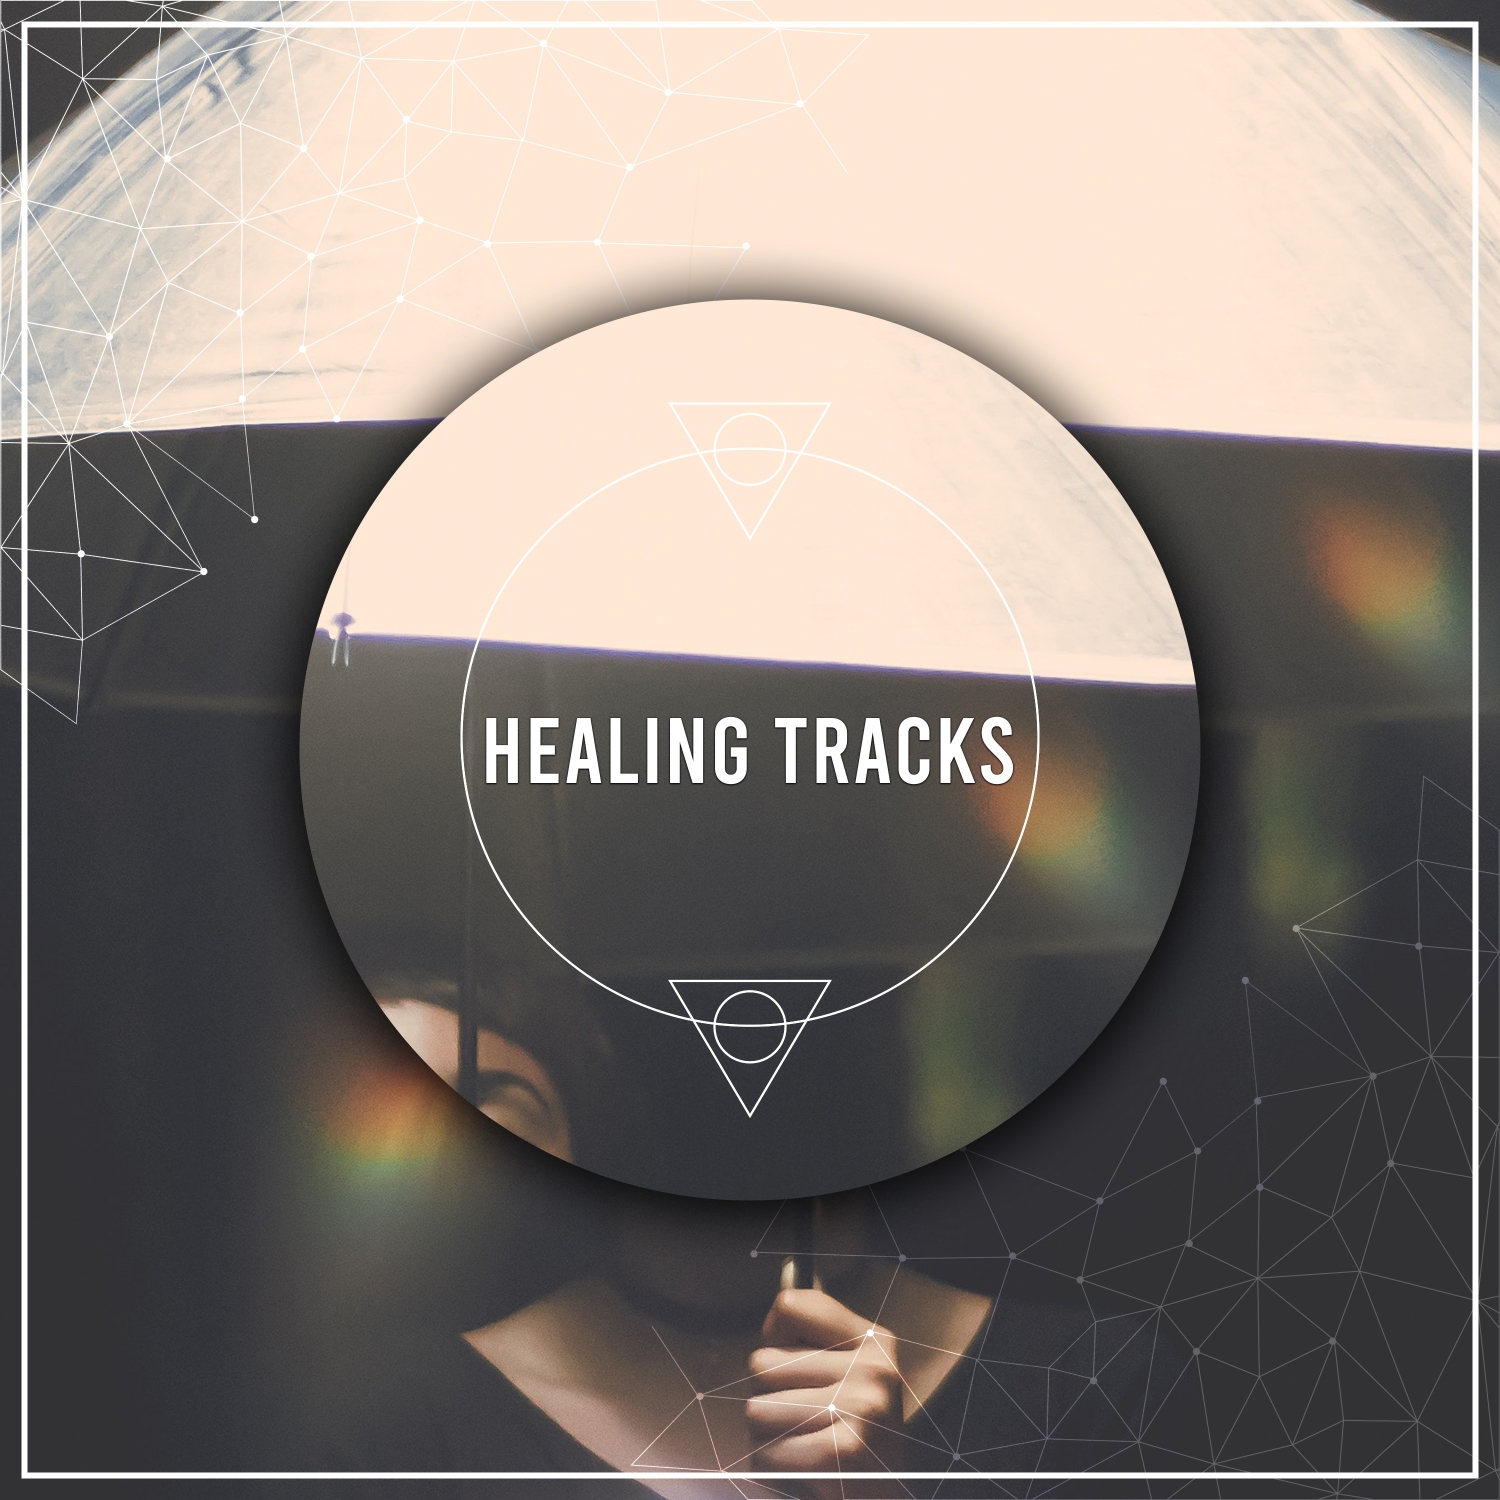 18 Natural Healing Tracks to Relax